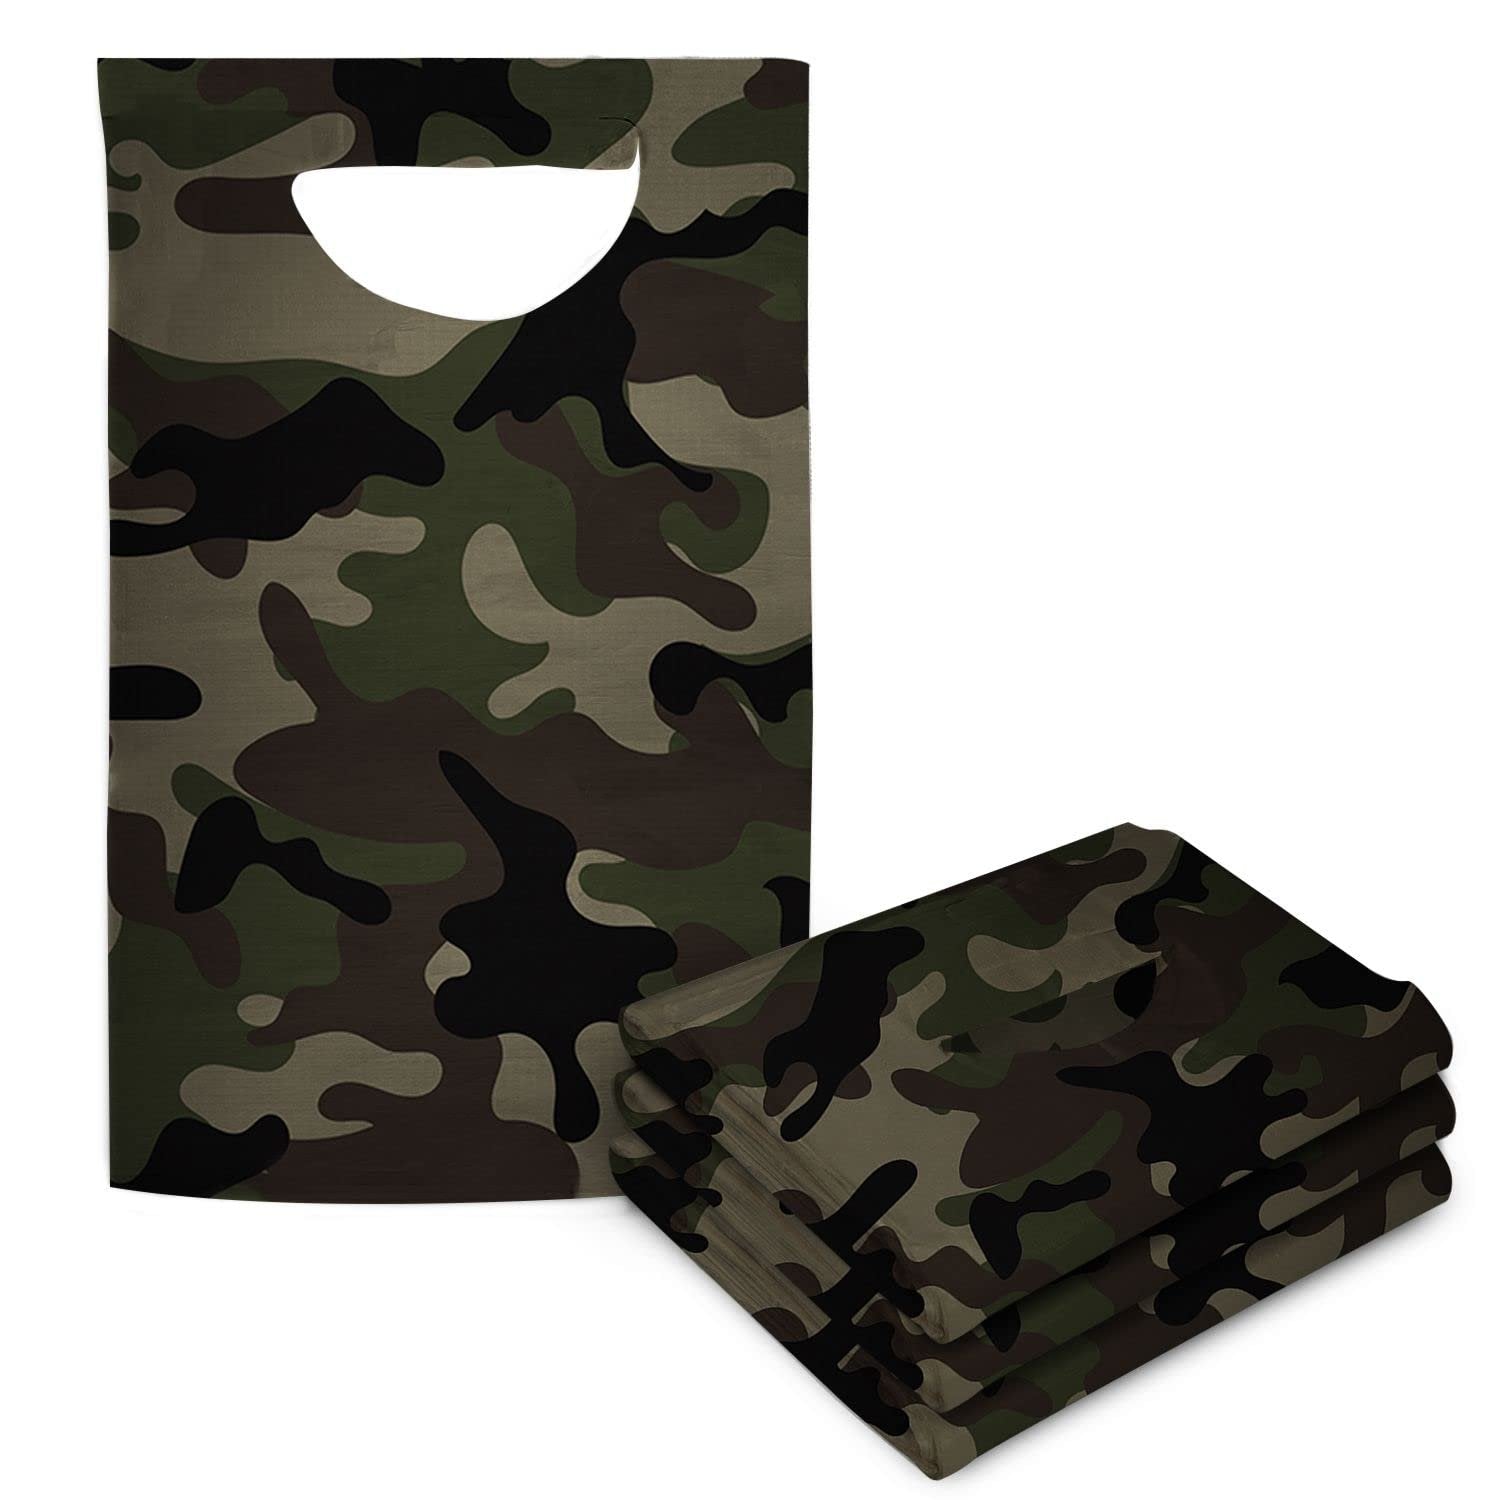 ProHeal Disposable Bibs For Adults, 100 Pack - Tie Back, 16" x 33" - Absorbent Tissue Front, Water Resistant Poly Backing - Adult Disposable Bibs for Eating, Dental Apron, And Senior Citizens - Camo